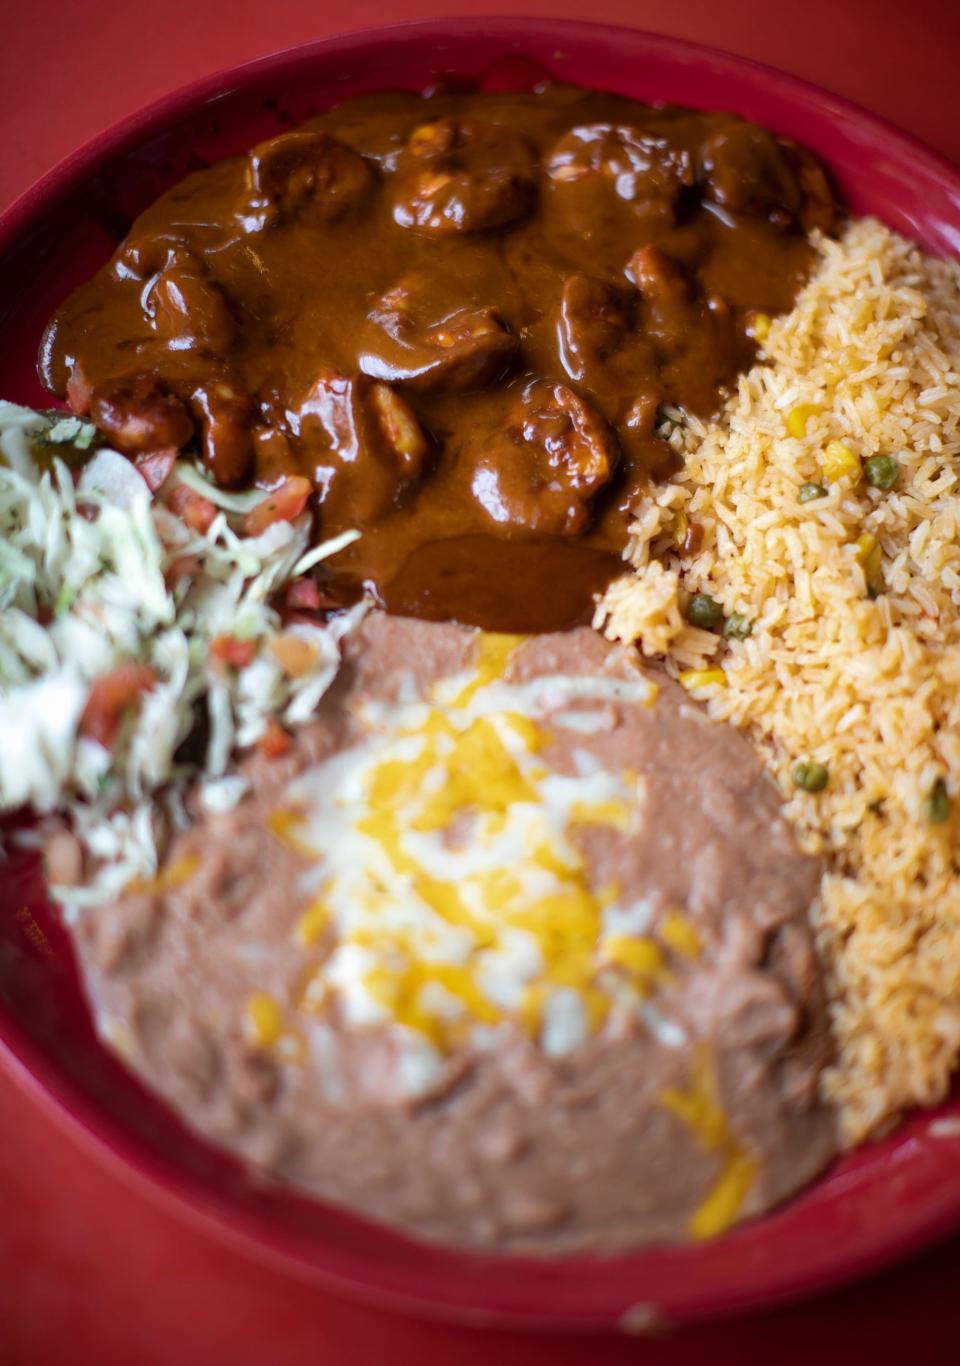 A traditional mole dish at Fiesta Jalisco in Northland.